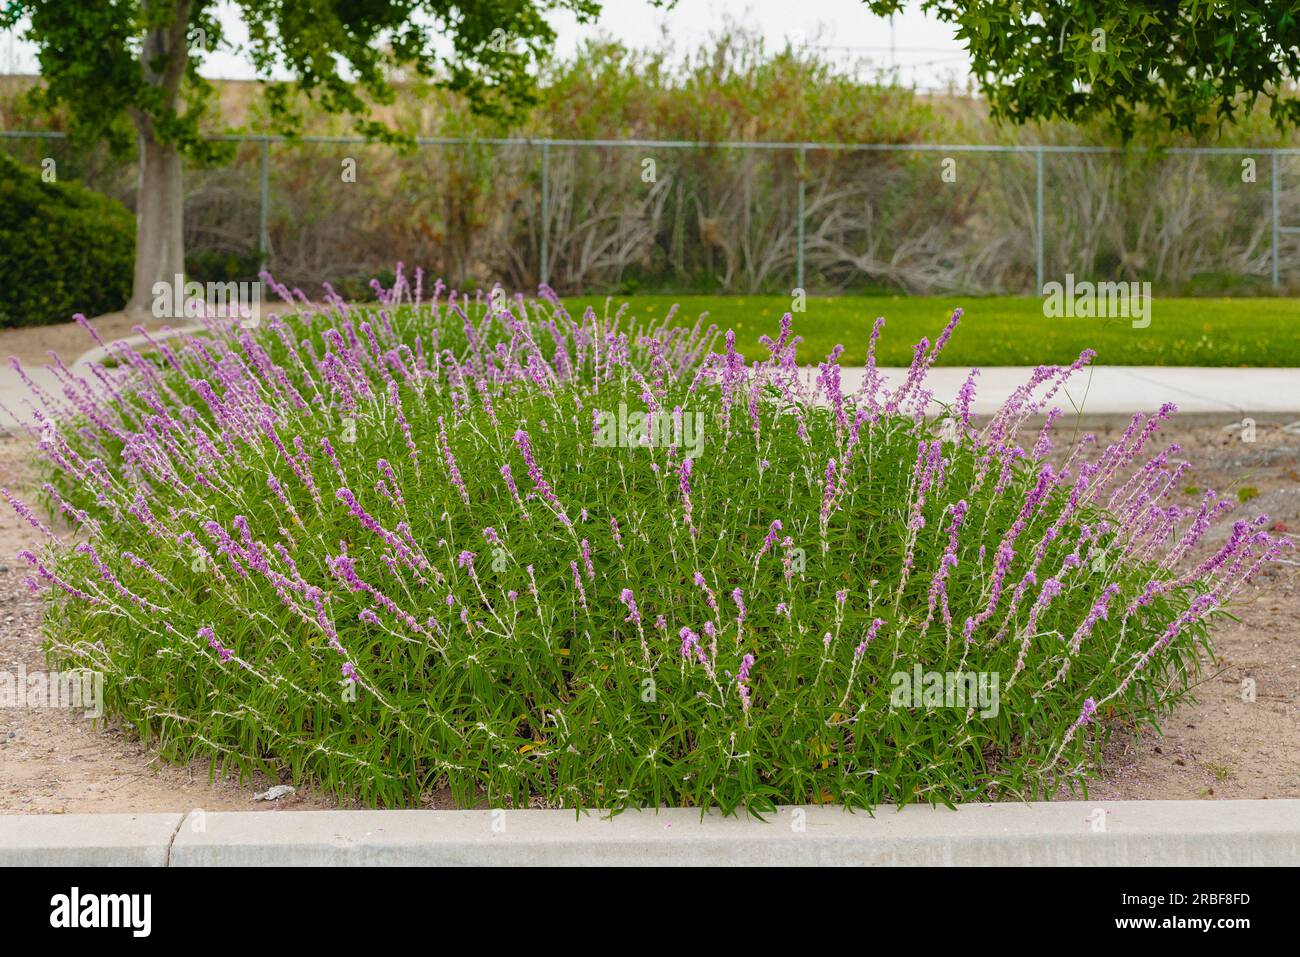 Colorful Mexican bush sage flowers in full bloom in city park. Salvia leucantha (Amethyst sage) flowers close-up Stock Photo